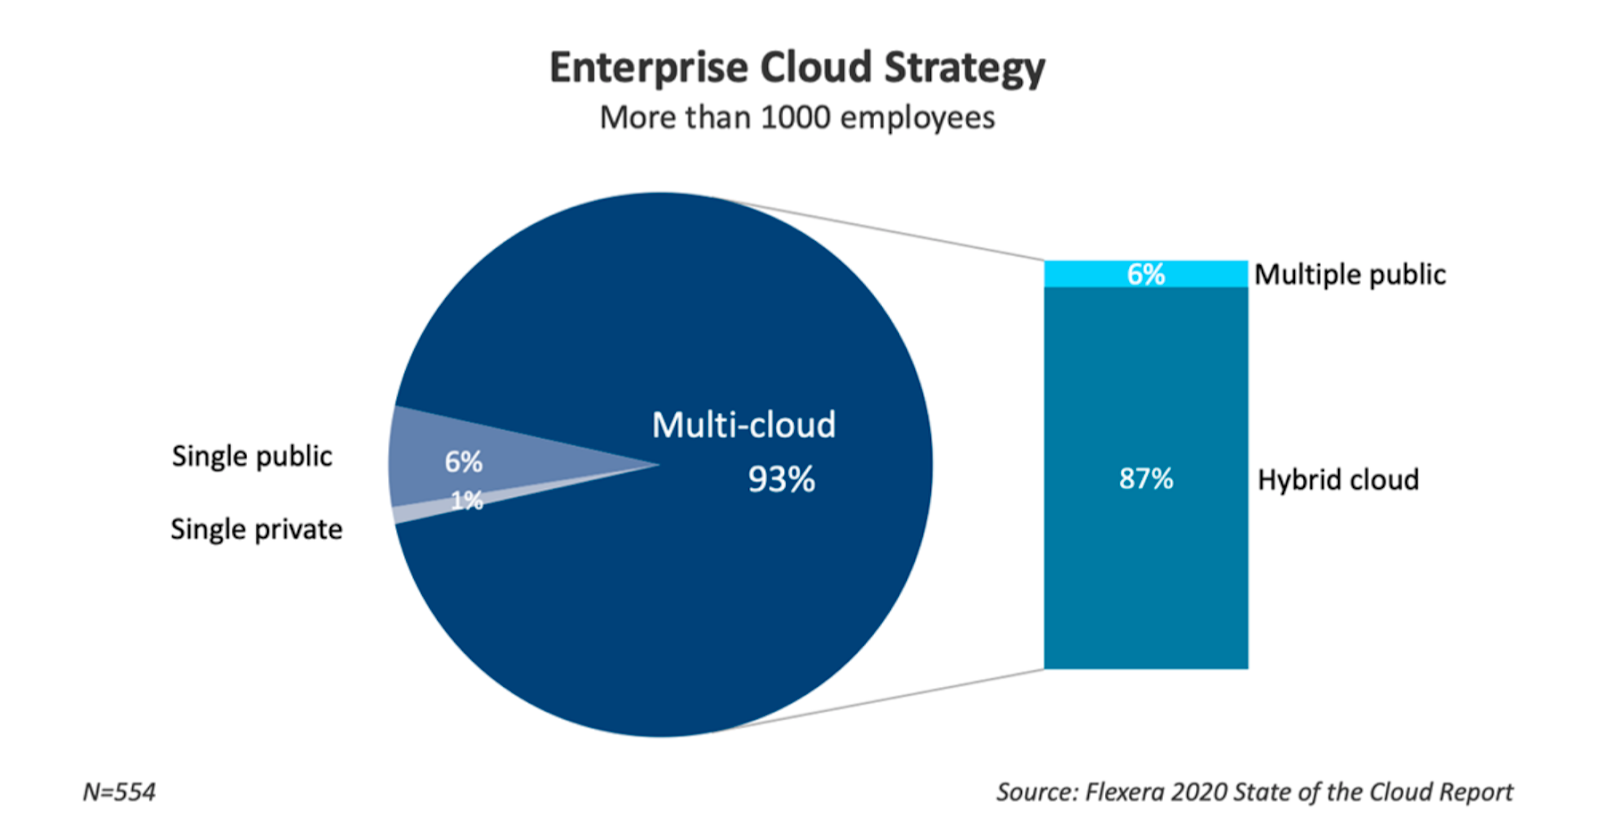 Chart of companies with more than 1000 employees and their cloud usage patterns